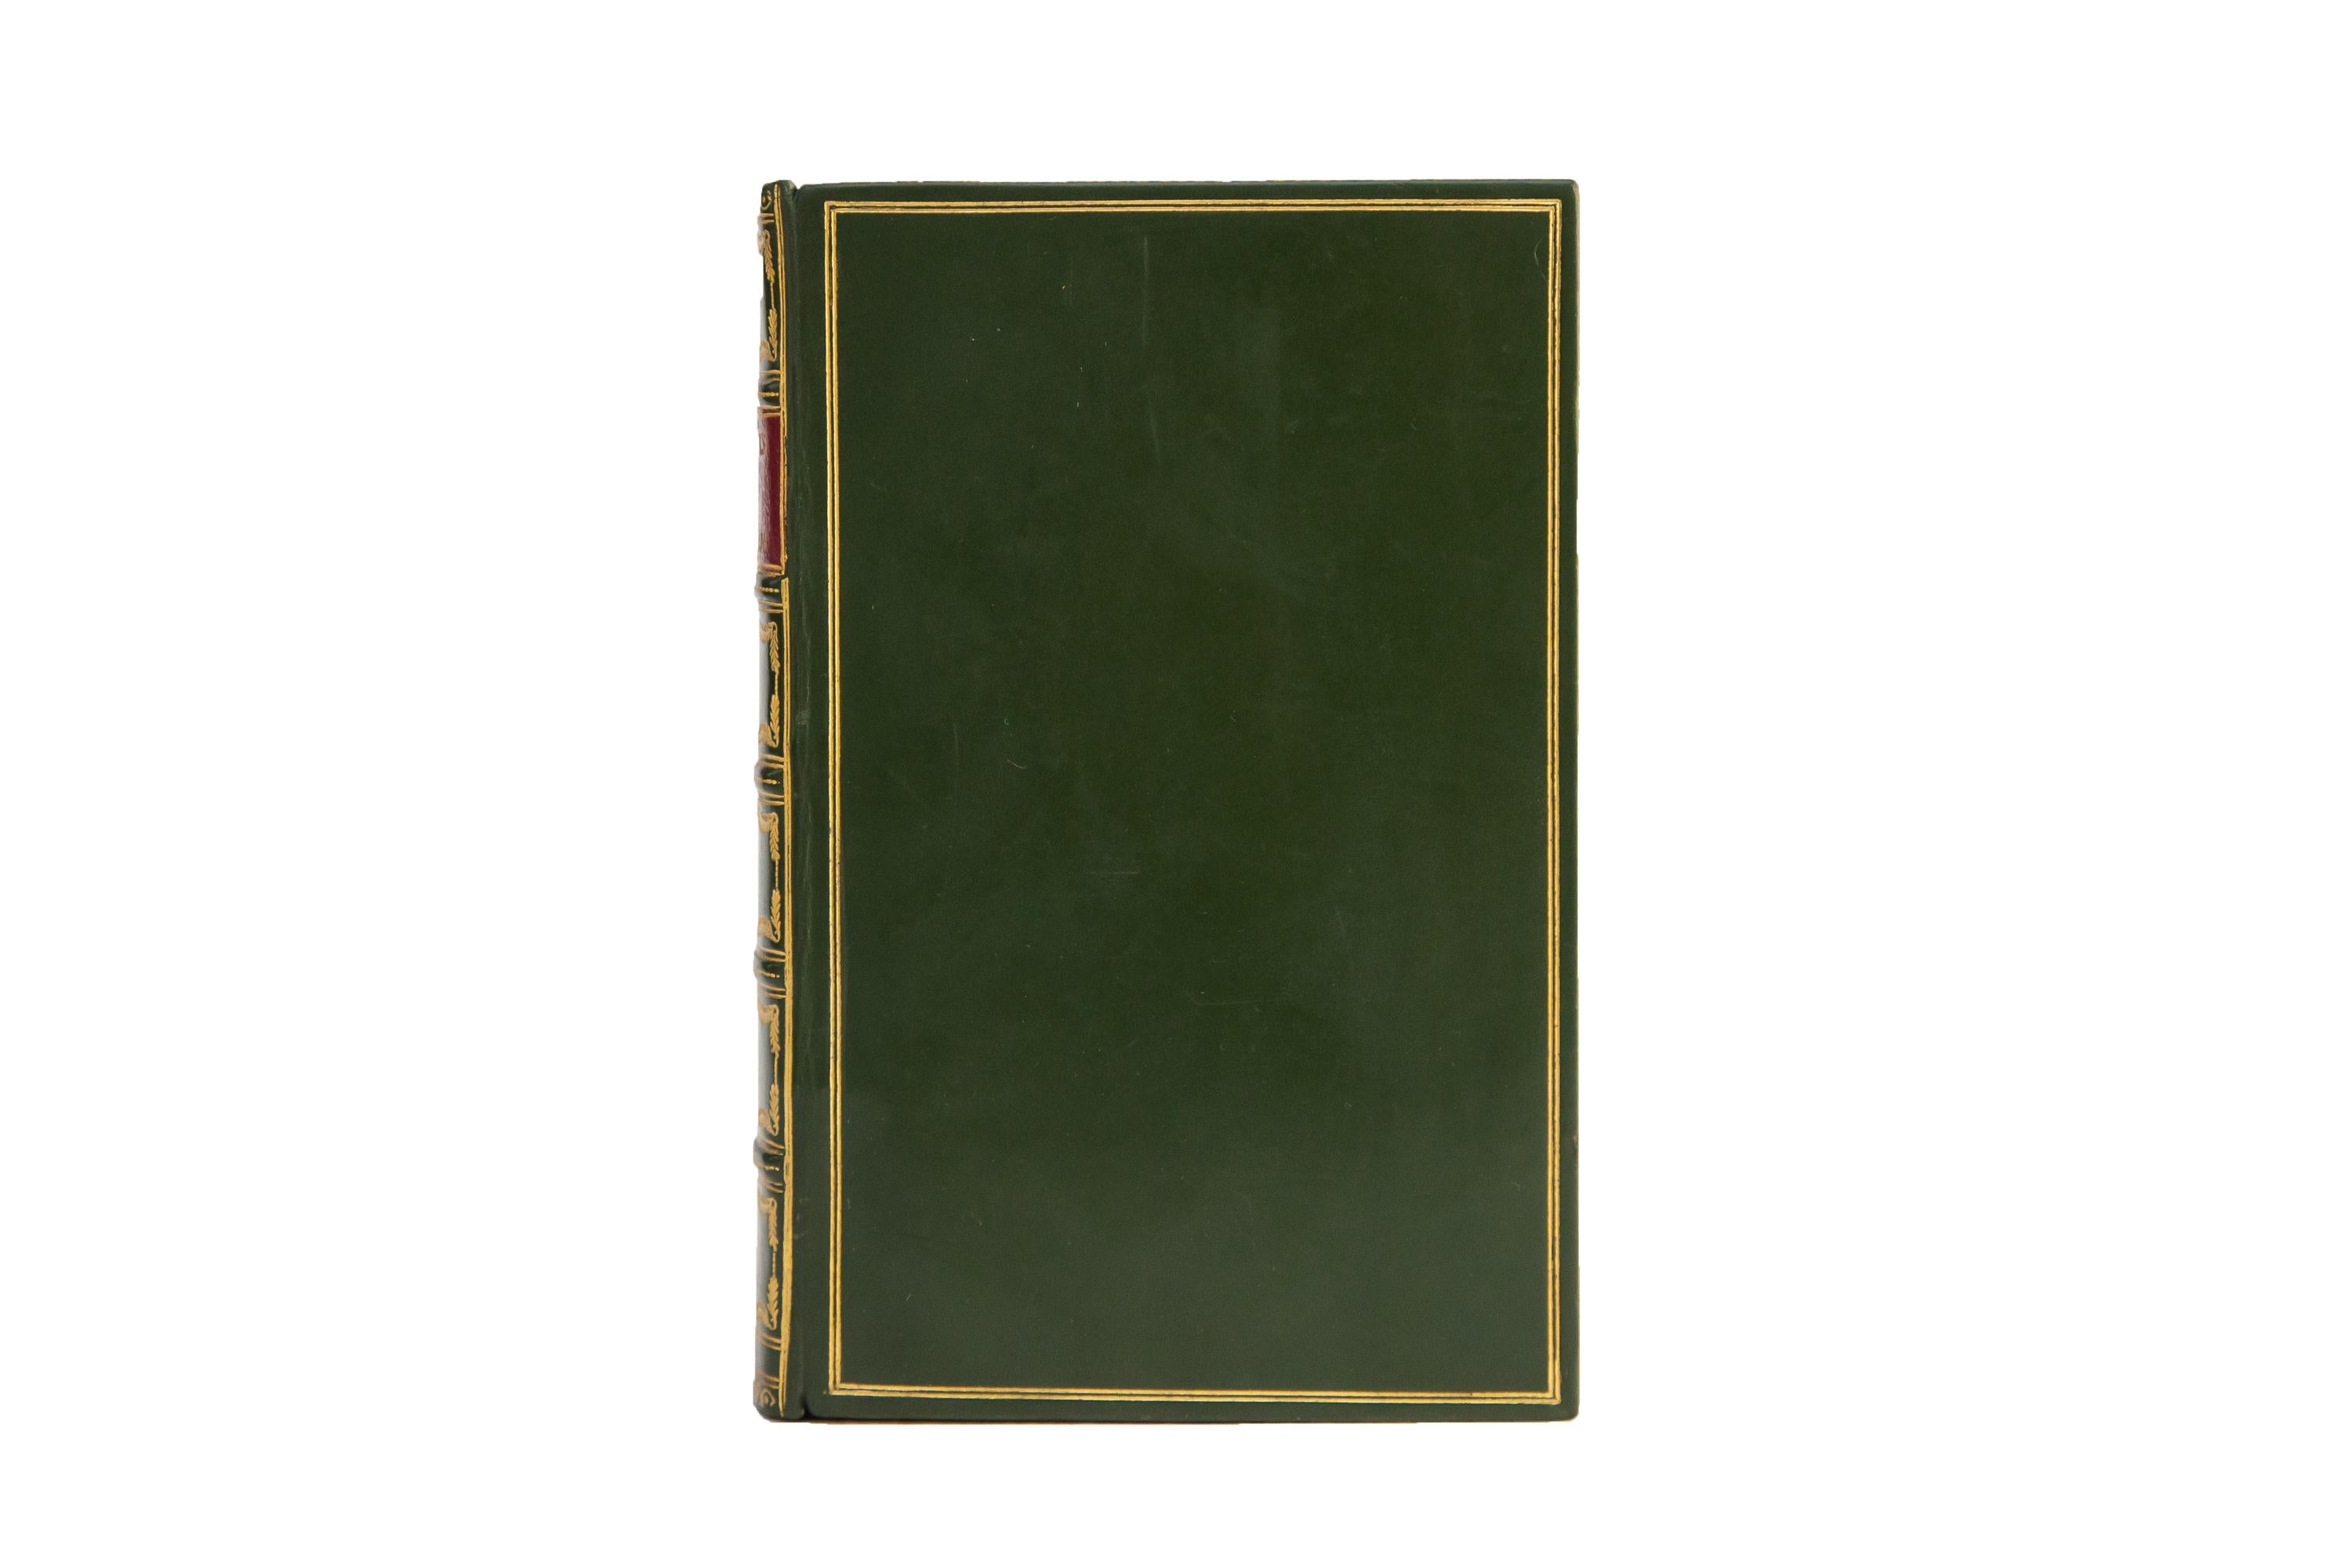 1 Volume. Walt Whitman, the Works. Bound in full green calf with a gilt tooled double border. Raised bands gilt with panels displaying pine details and label lettering in gilt tooling as well as a red morocco label. All of the edges are gilt with